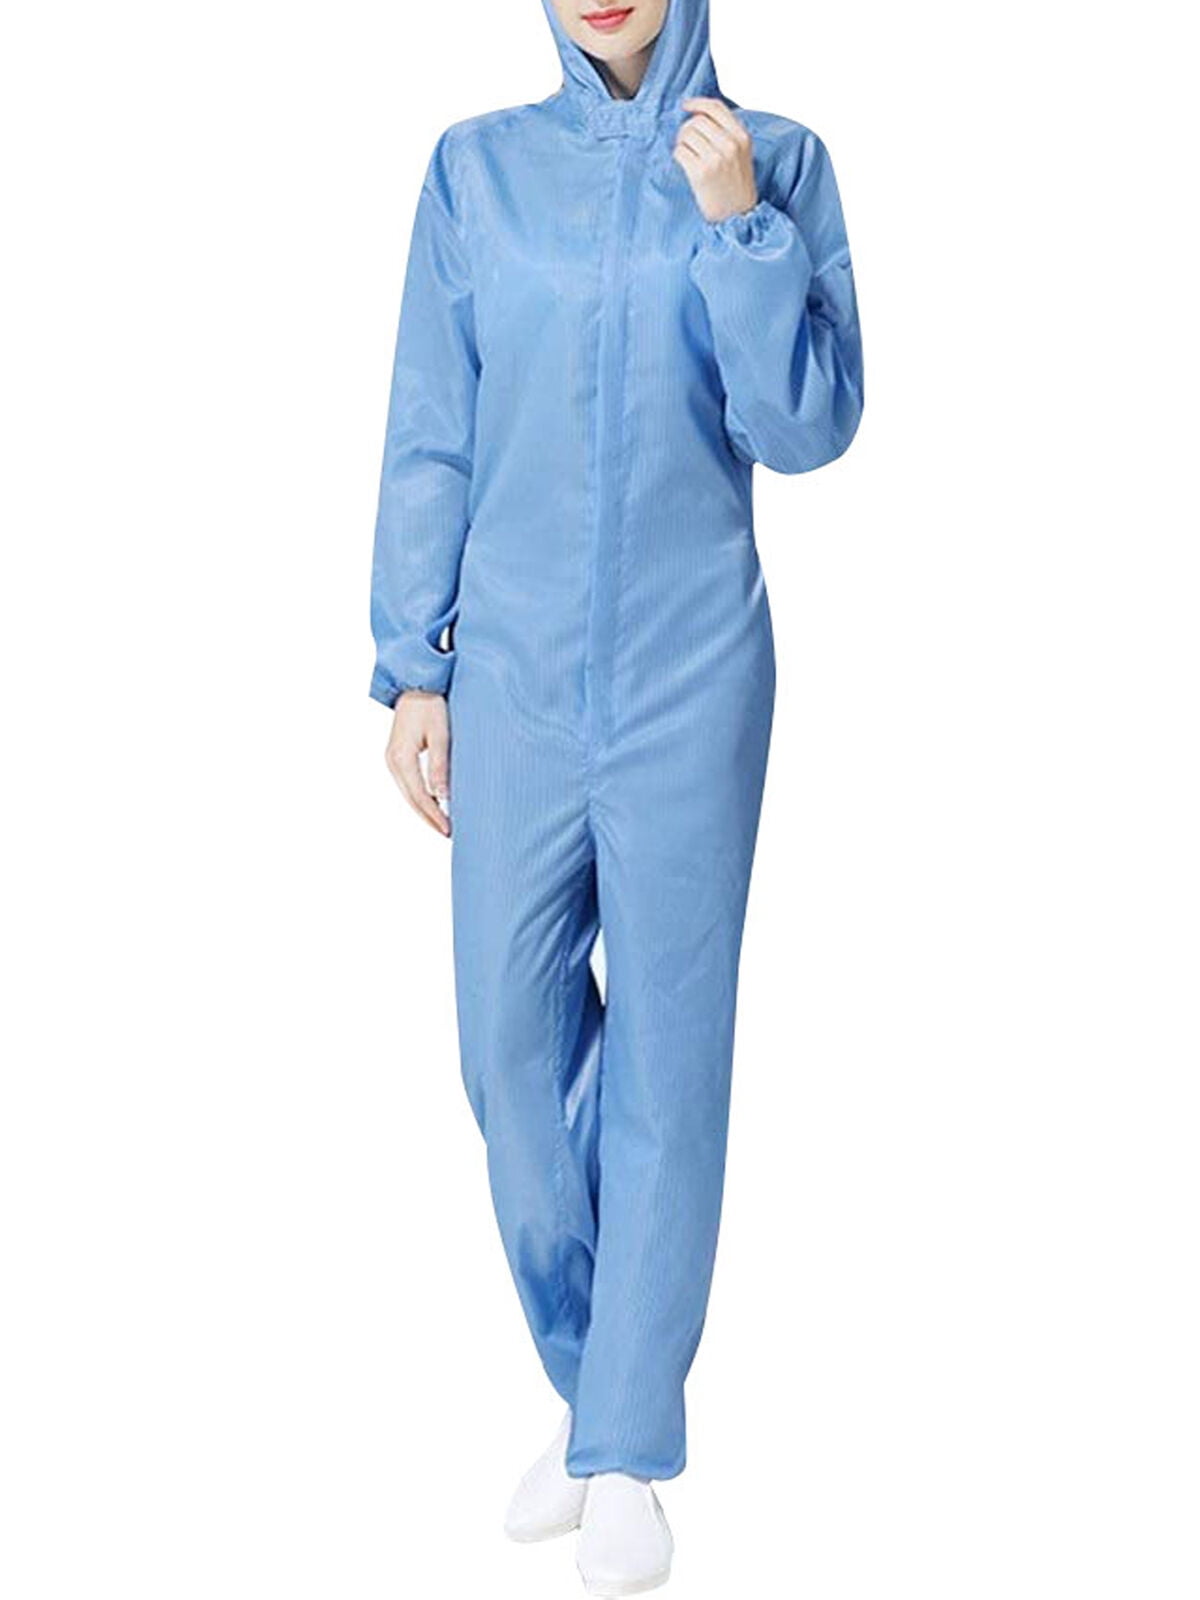 Polyester Dust-Proof and Anti-Static Work Coverall for Women Men S-3XL ChYoung Plus Size Reusable Protective Hooded